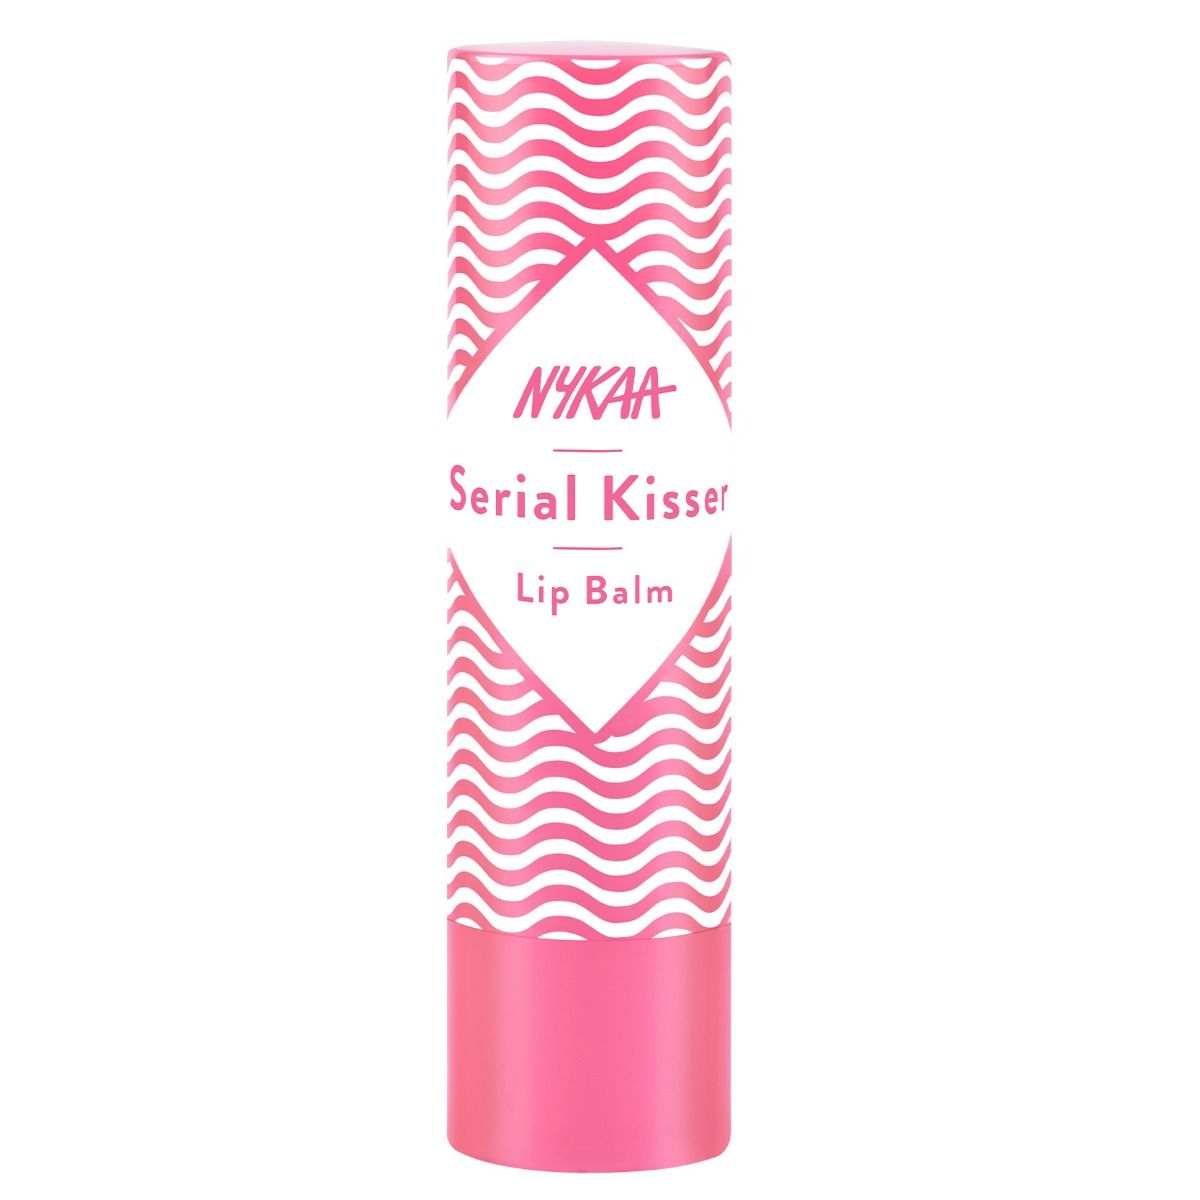 Nykaa Serial Kisser Pomegranate Flavour Lip Balm, 4.5 gm, Pack of 1 